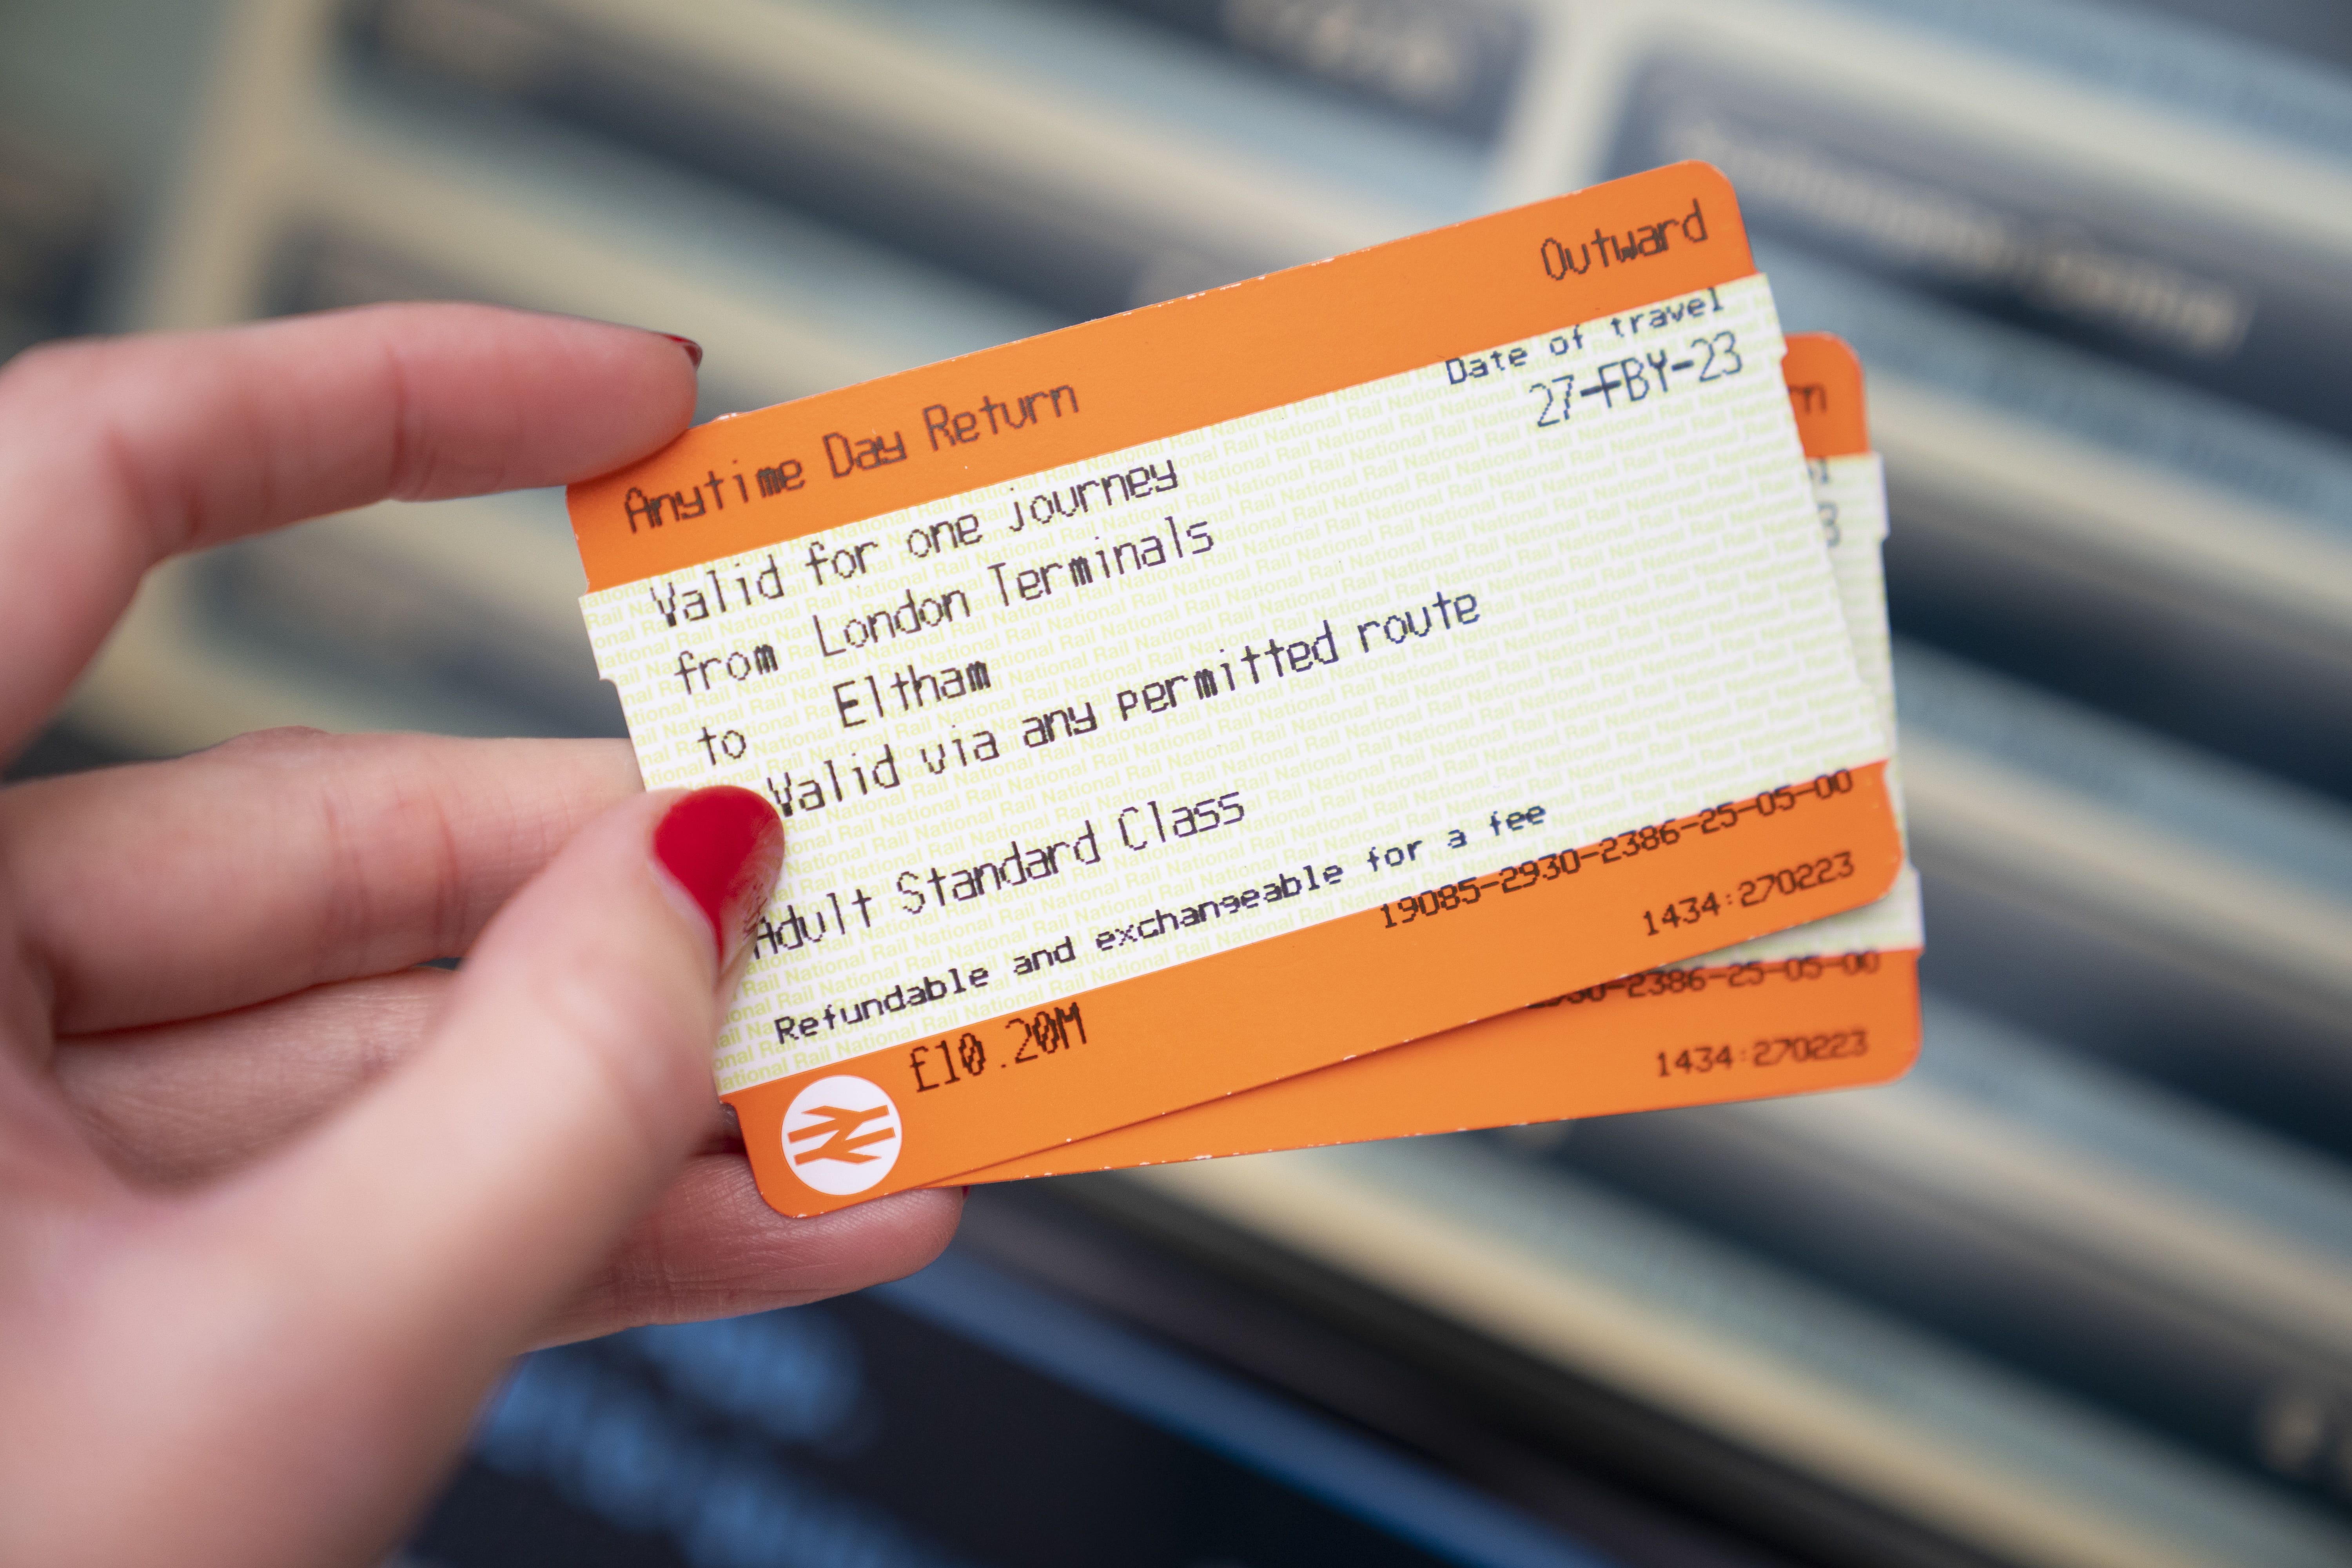 The government has axed plans to set up a train ticket retailer